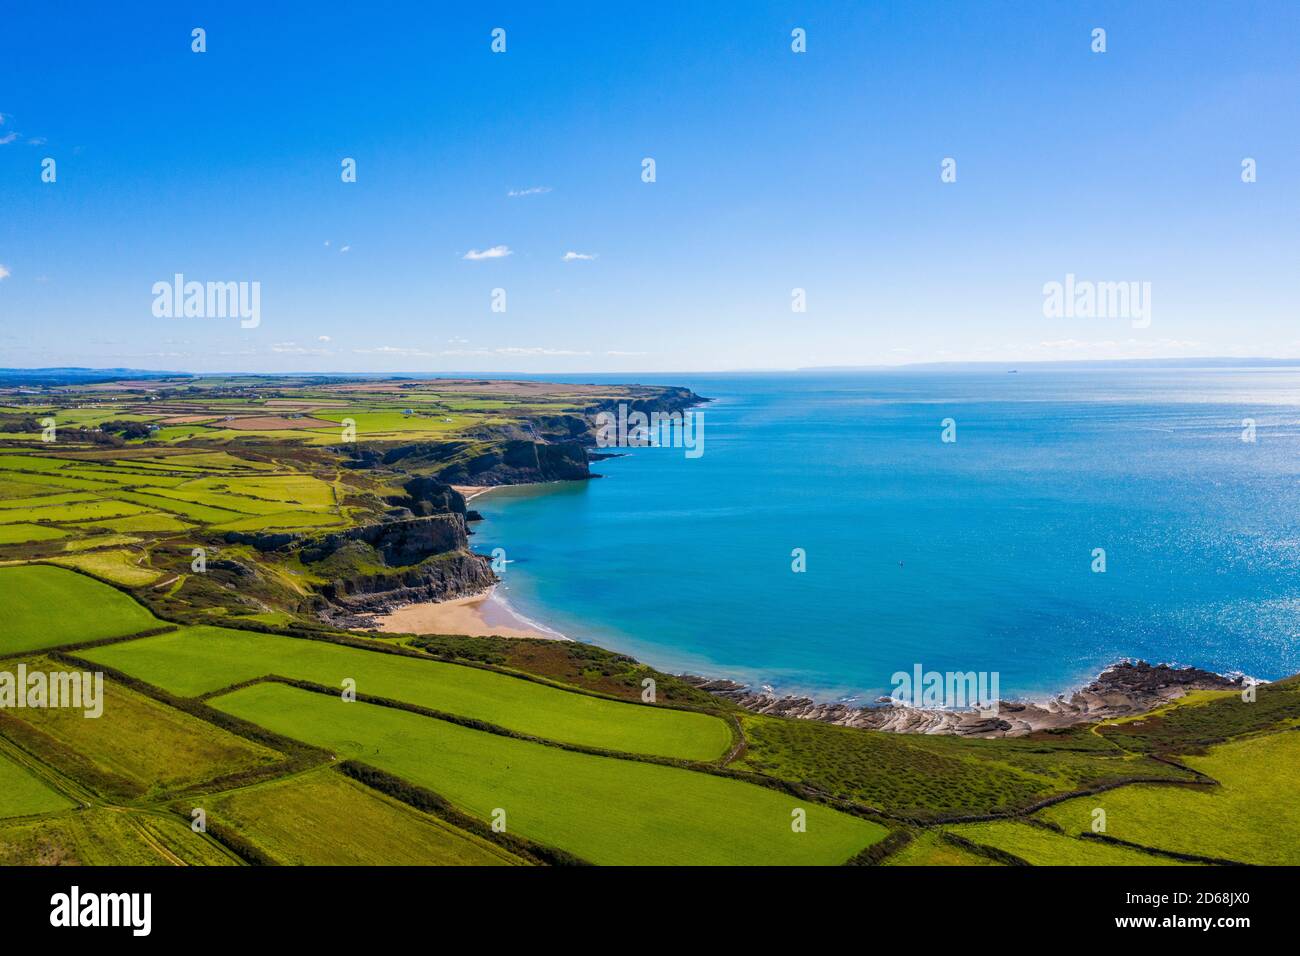 Aerial shot of the scenic peninsula of Rhossili bay in Gower, Wales. Stock Photo